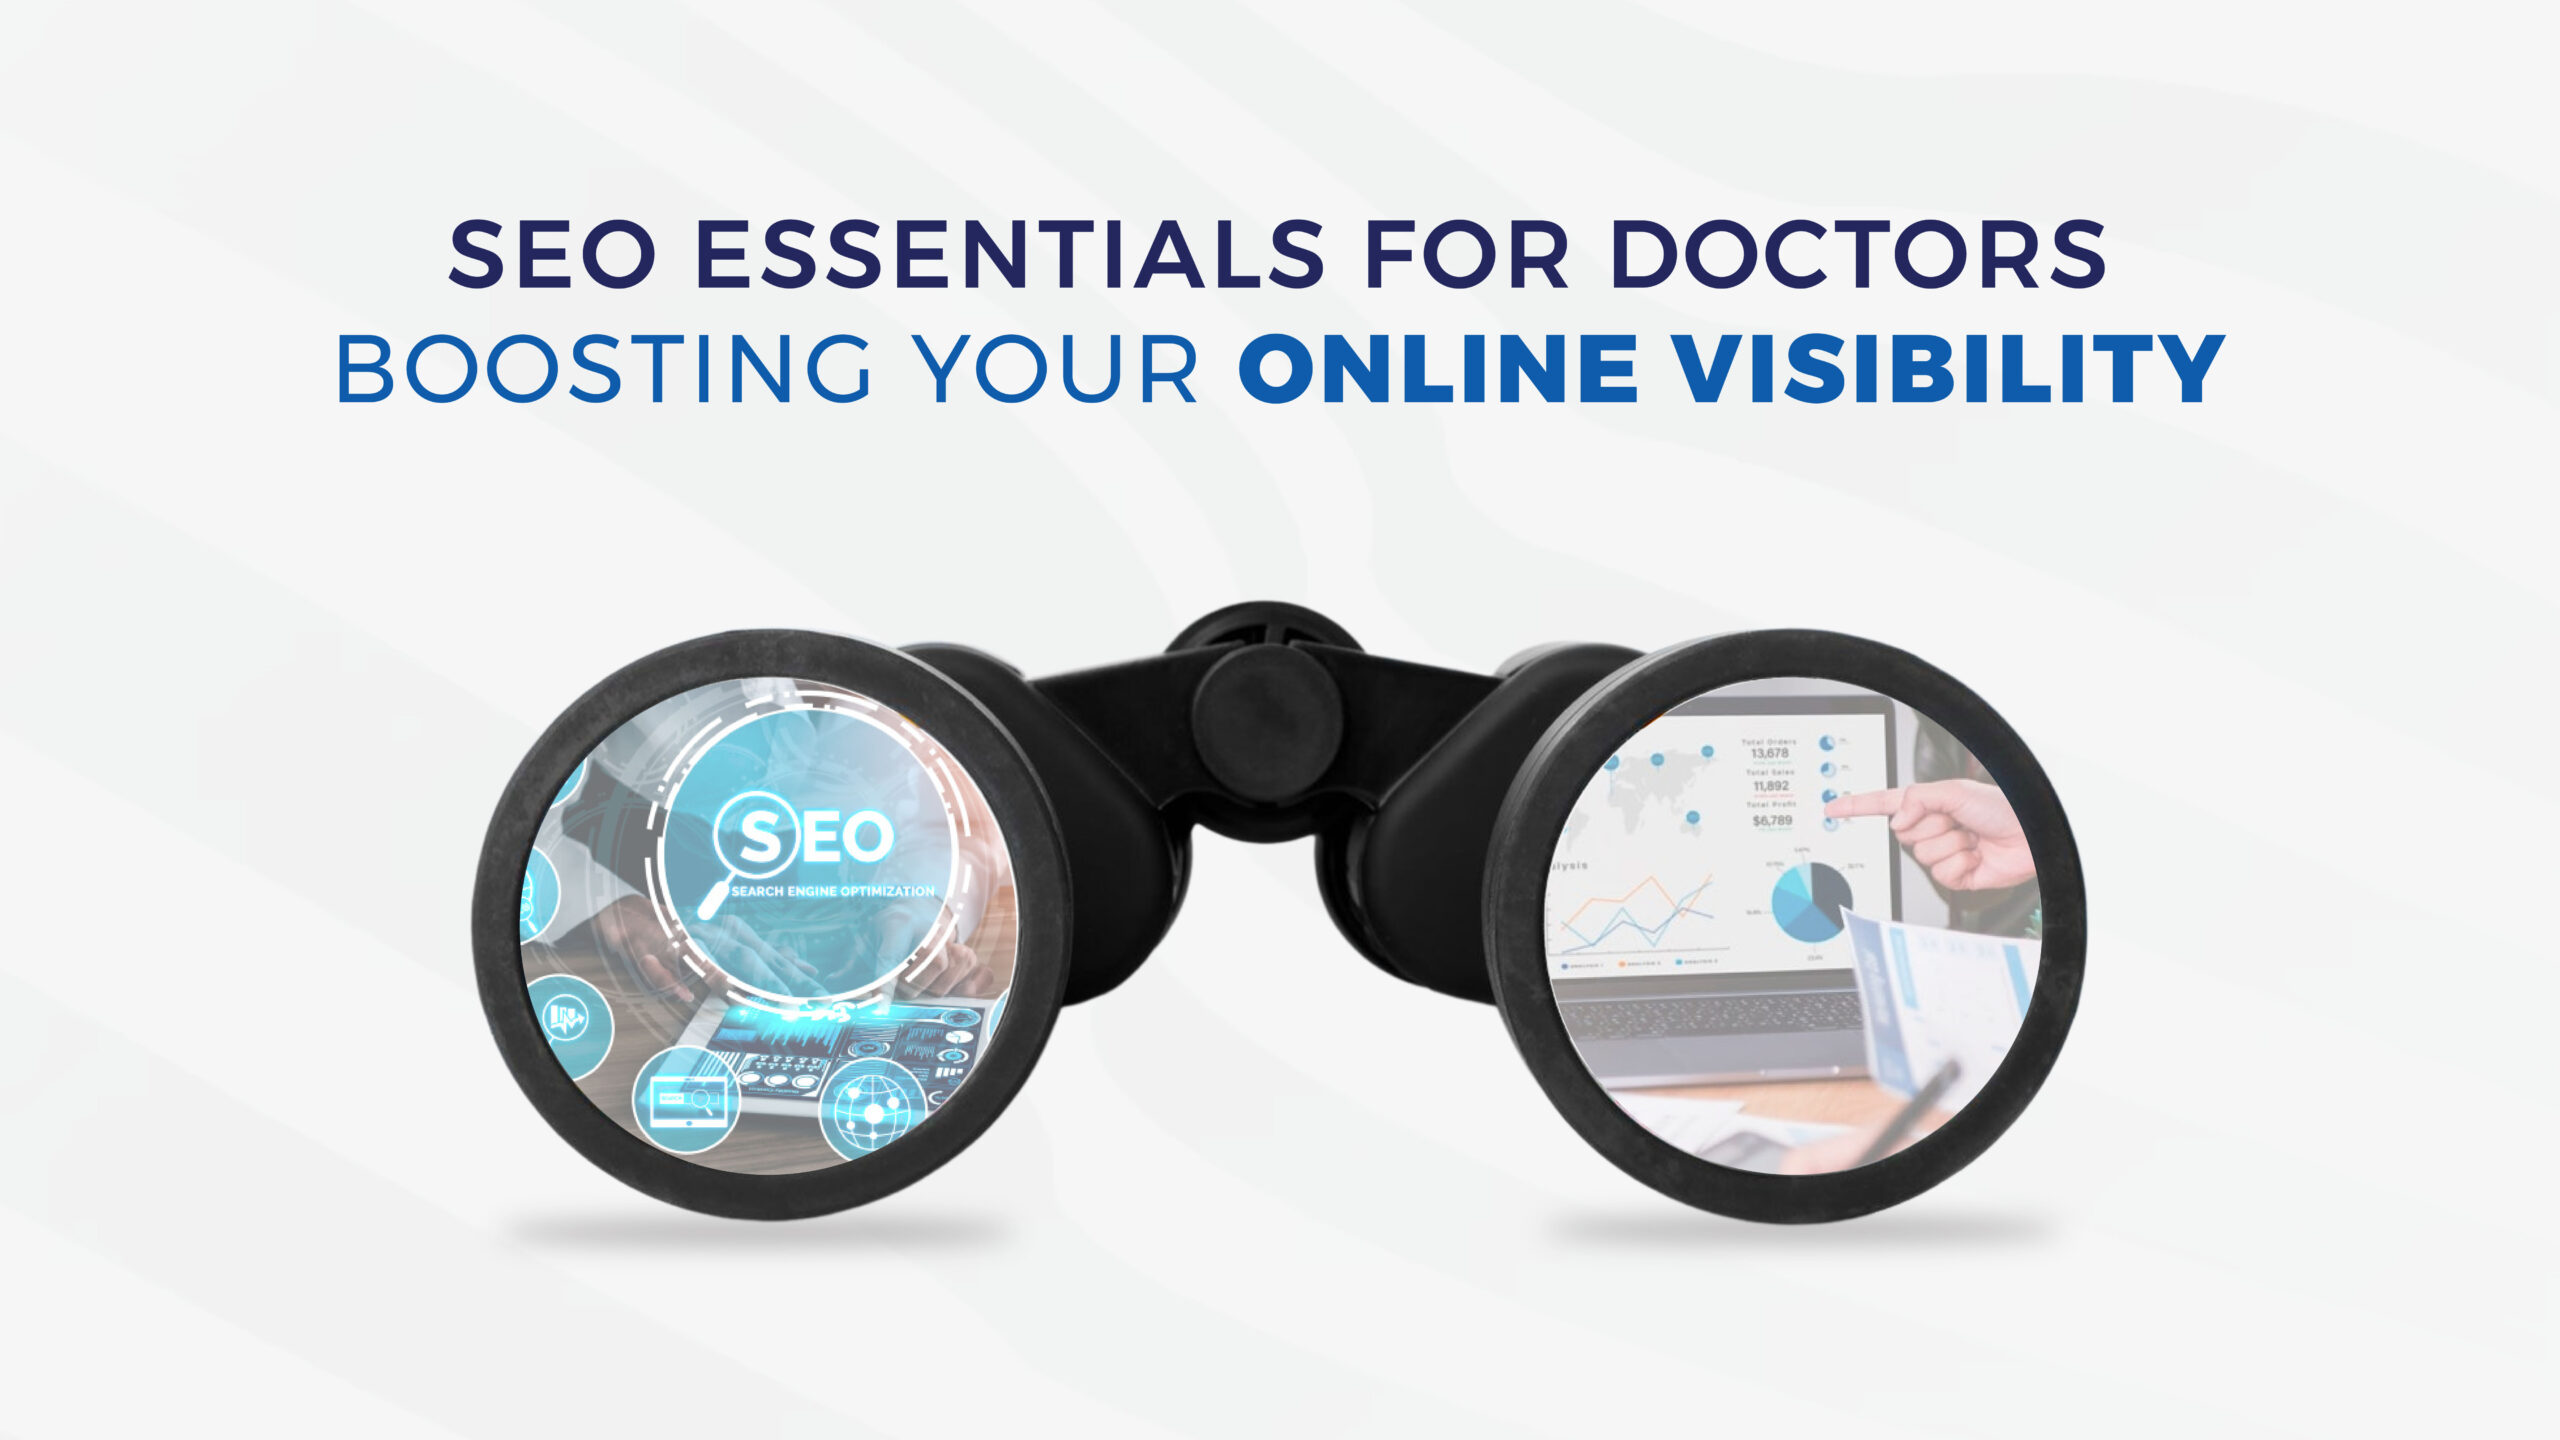 SEO-ESSENTIALS-FOR-DOCTORS-BOOSTING-YOUR-ONLINE-VISIBILITY-DVS-BLOG-BANNERS-FOR-DOCTORS-03-1-scaled.jpg